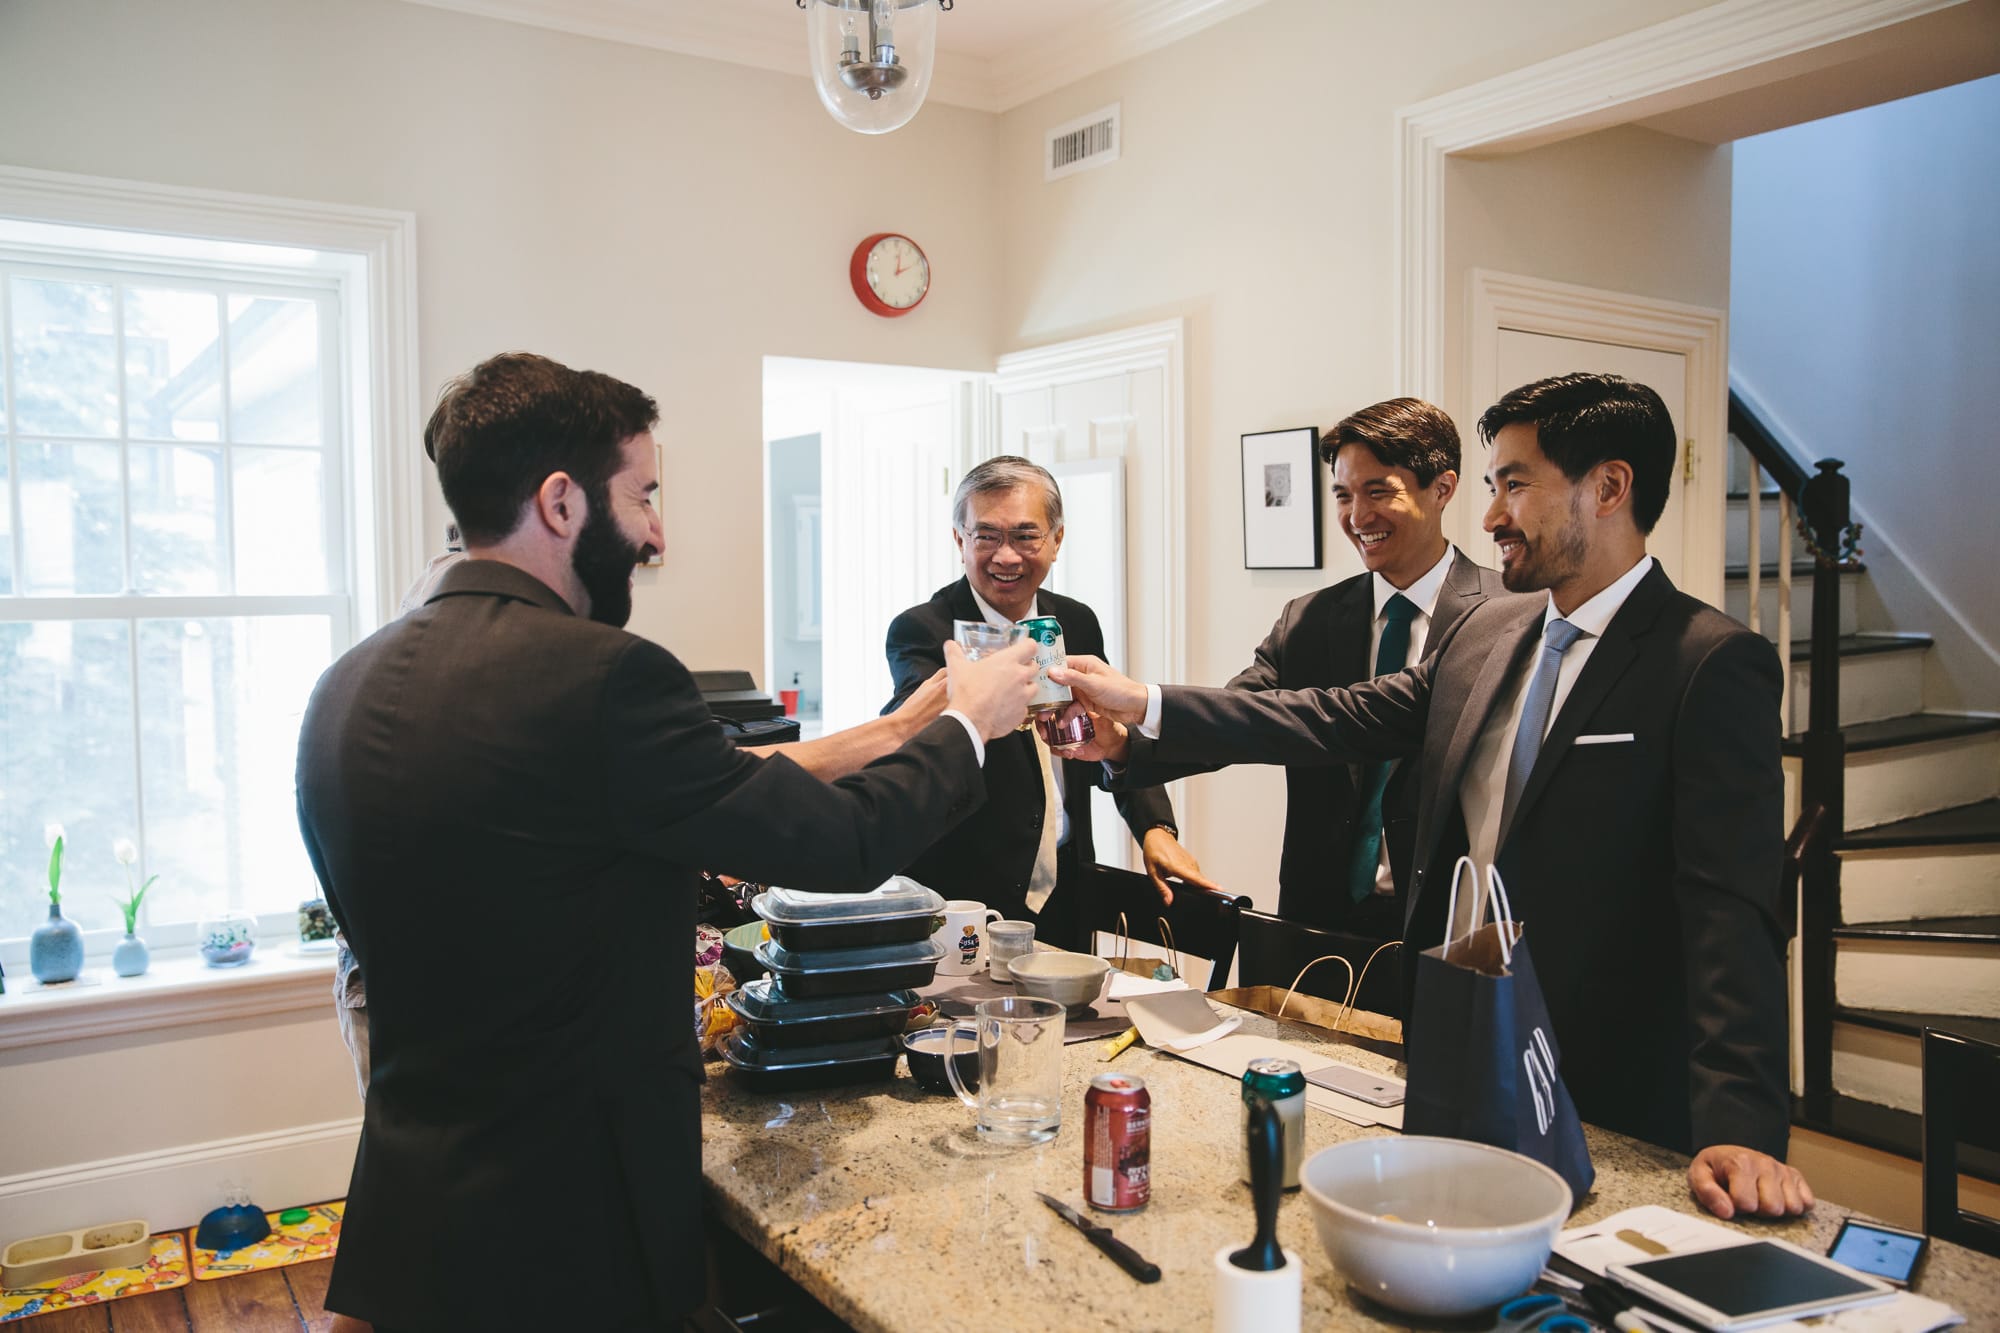 A documentary photograph of a groom and his groomsmen sharing a toast before his Artists for Humanity Wedding in Boston, Massachusetts